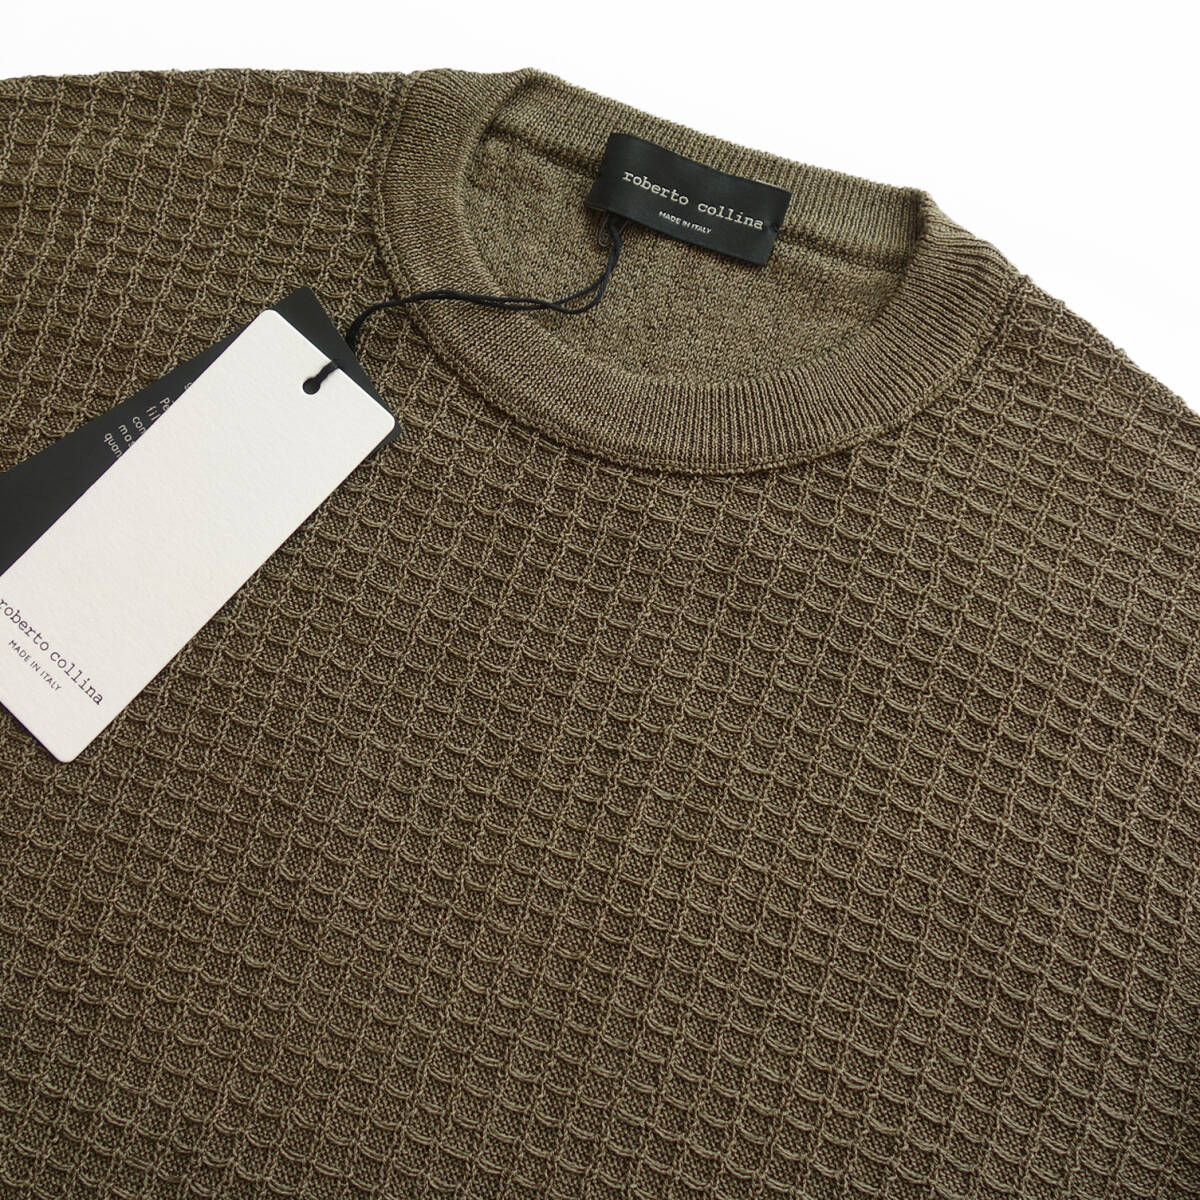 [ roberto collinaro belt collie na] new goods spring summer thing cotton screw course thermal braided crew neck knitted olive 50 39,600 jpy L XL